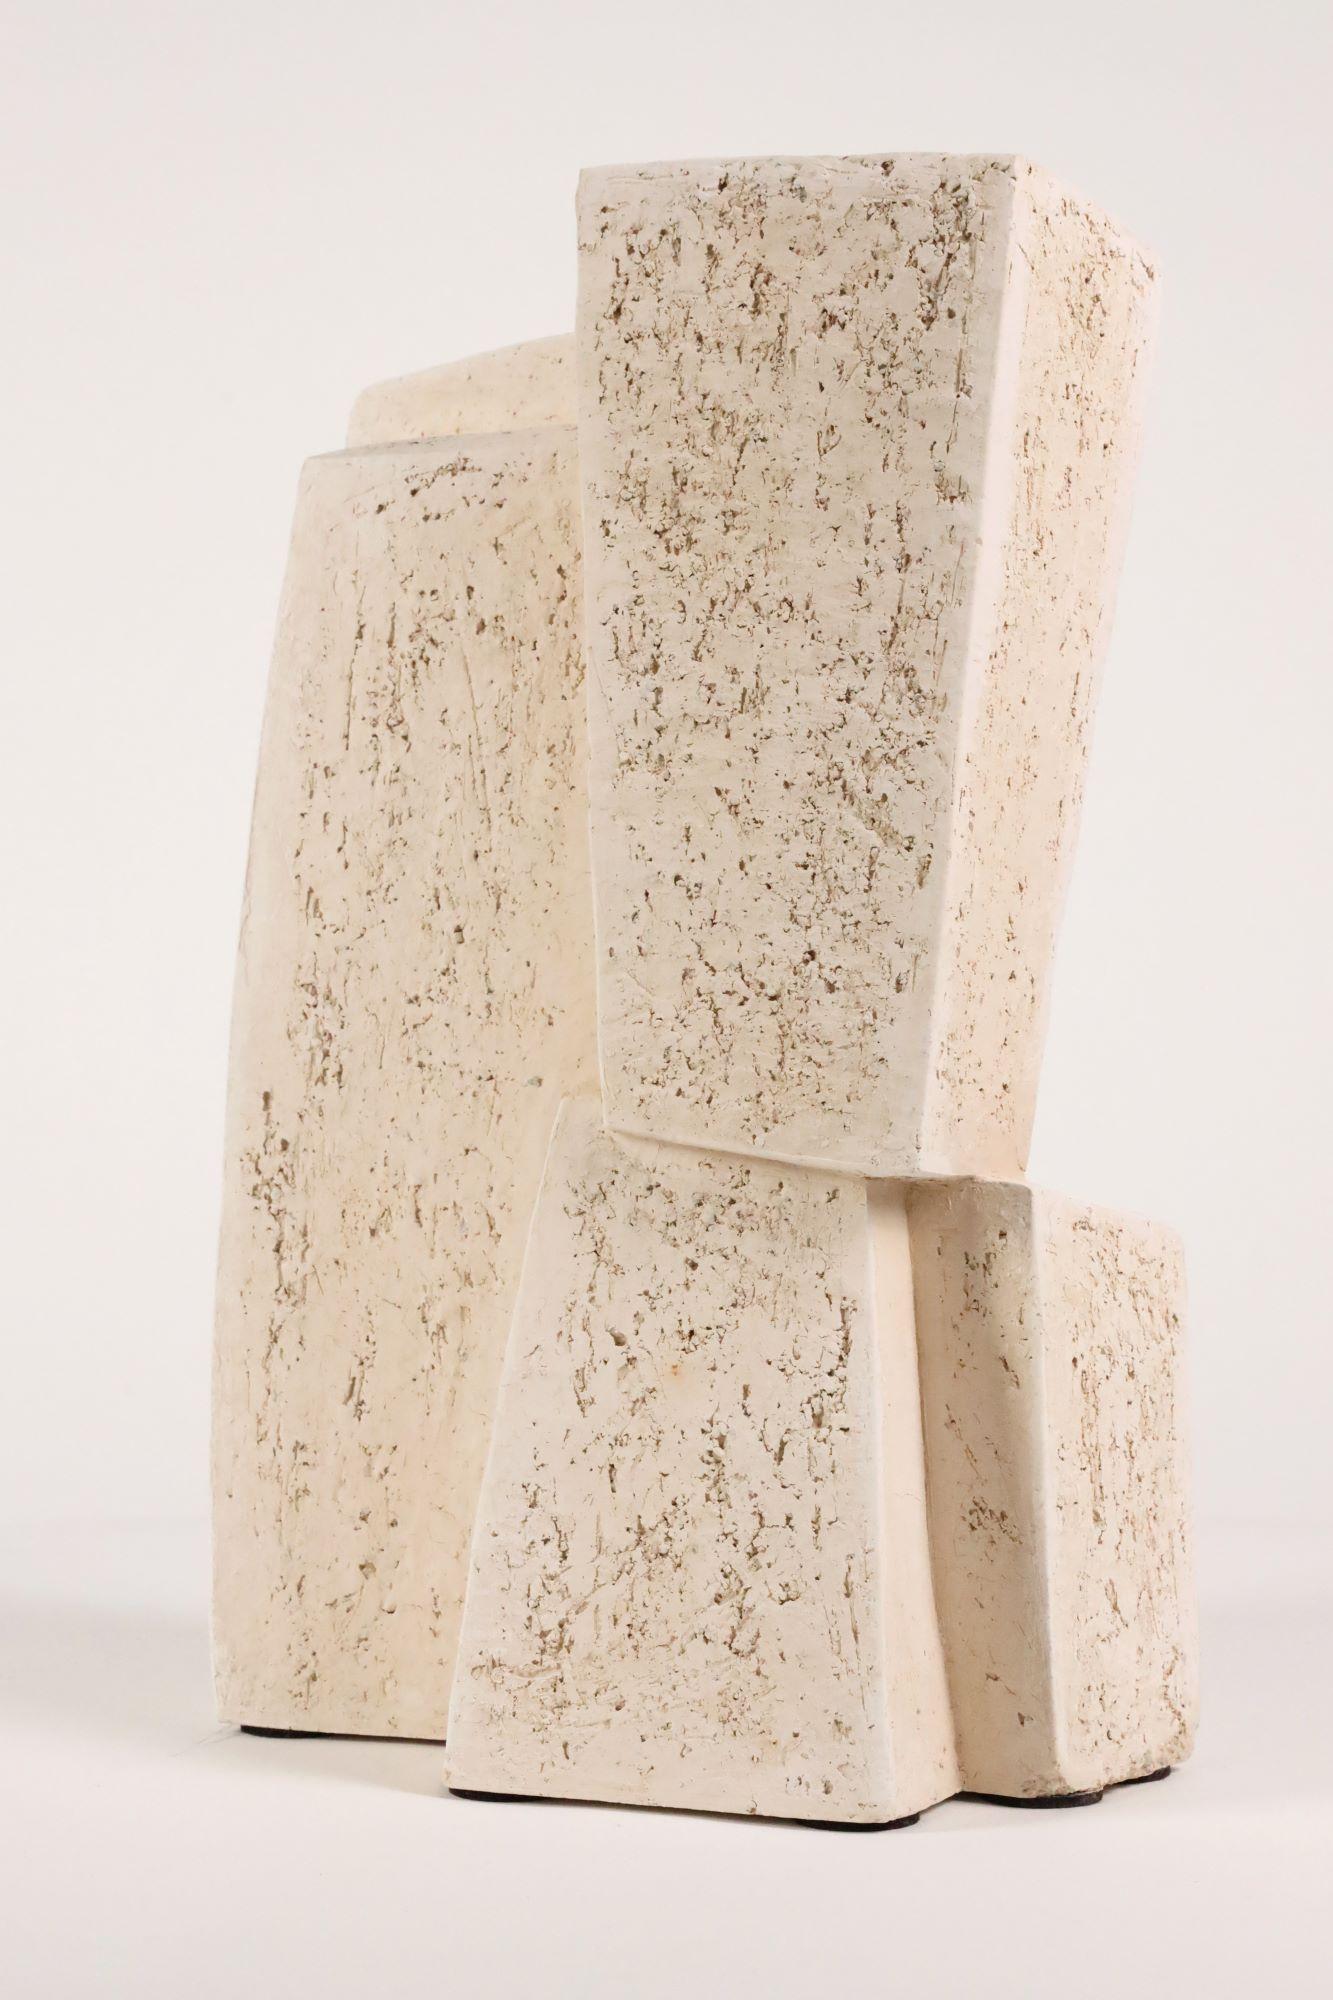 Union V is a unique white terracotta sculpture with chamotte by contemporary artist Delphine Brabant, dimensions are 45 × 27 × 19 cm (17.7 × 10.6 × 7.5 in). 
The sculpture is signed and comes with a certificate of authenticity.

As she alternates